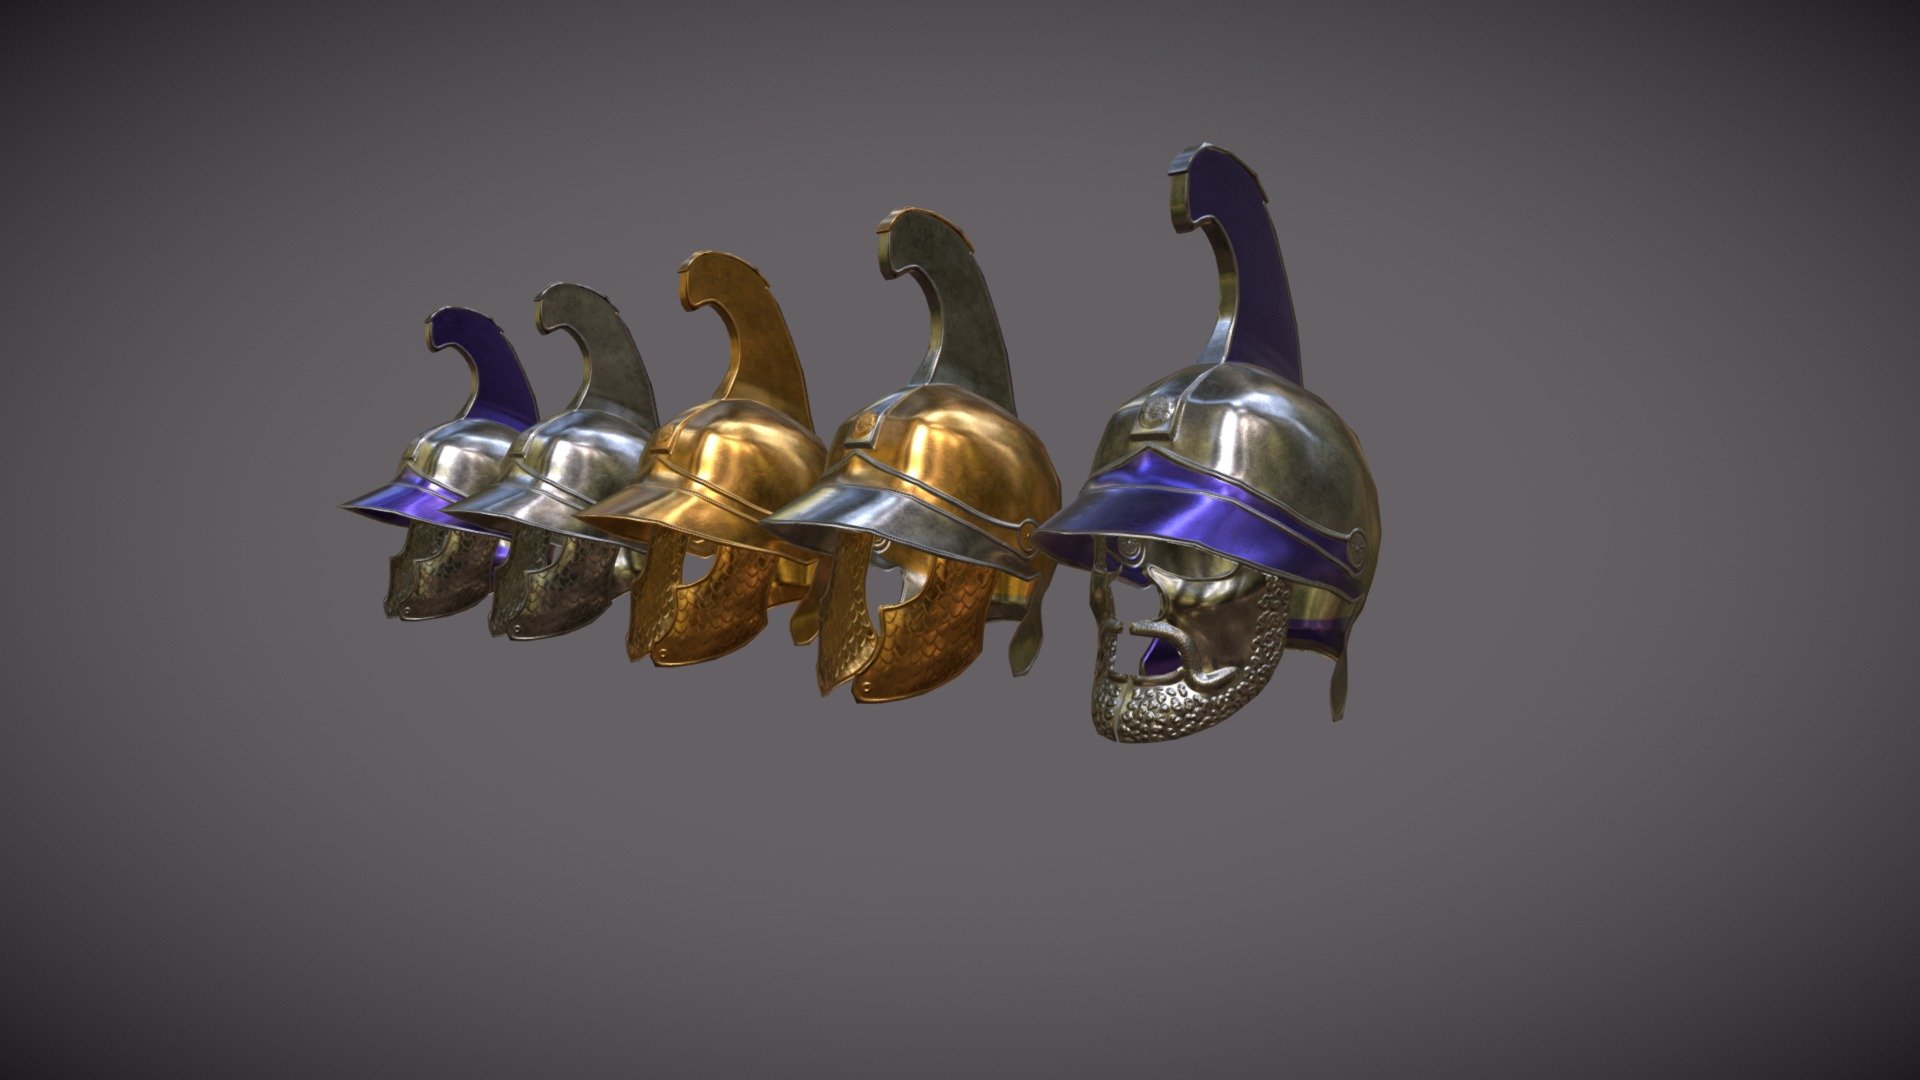 Helmet of the Phrygian type, possibly of Seleucid origin. Different color setups and different cheekguards. To note the scaled version as well as the notorious bearded guard. In addition, one cant note the slimmer and elongated crest.

Made for the RIR: Imperium Surrectum mod, for the game Rome Total War Remastered.

Made in Blender - 3280 vertices

The process consists of modelling a low poly version, from which a copy is made with a very high dense mesh where details are sculpted in, later baked onto its low poly counterpart.

The different colours are textured painted in - Phyrigian Helmets - 3D model by João Paulo (@Grimbold) 3d model